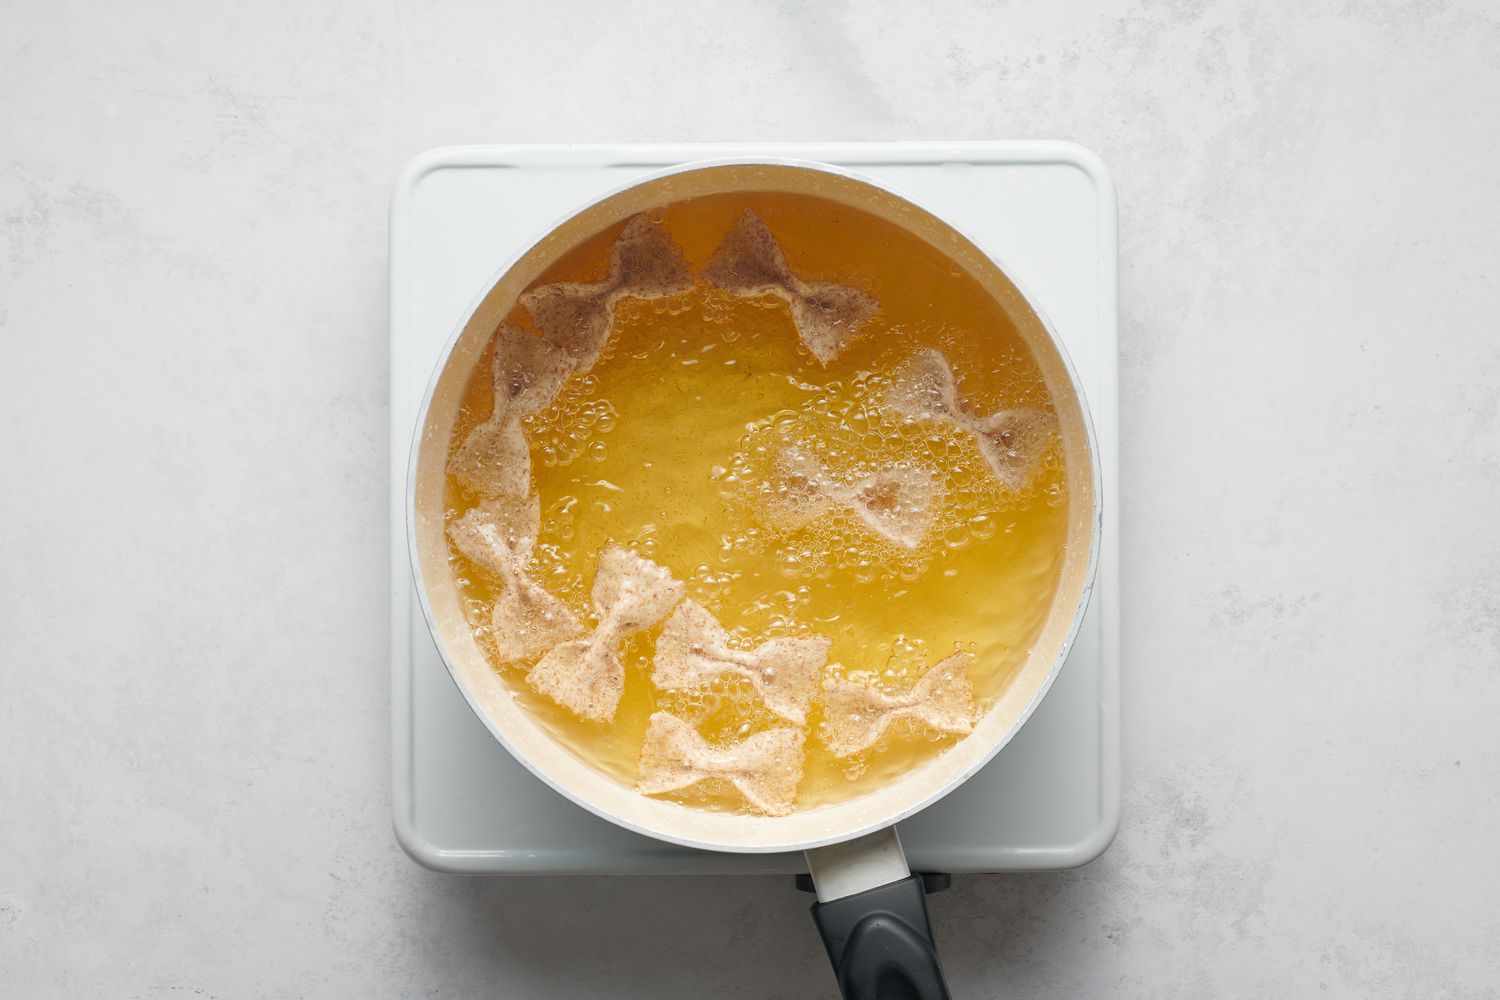 Pieces of bowtie-shaped pasta dough frying in a pot of oil